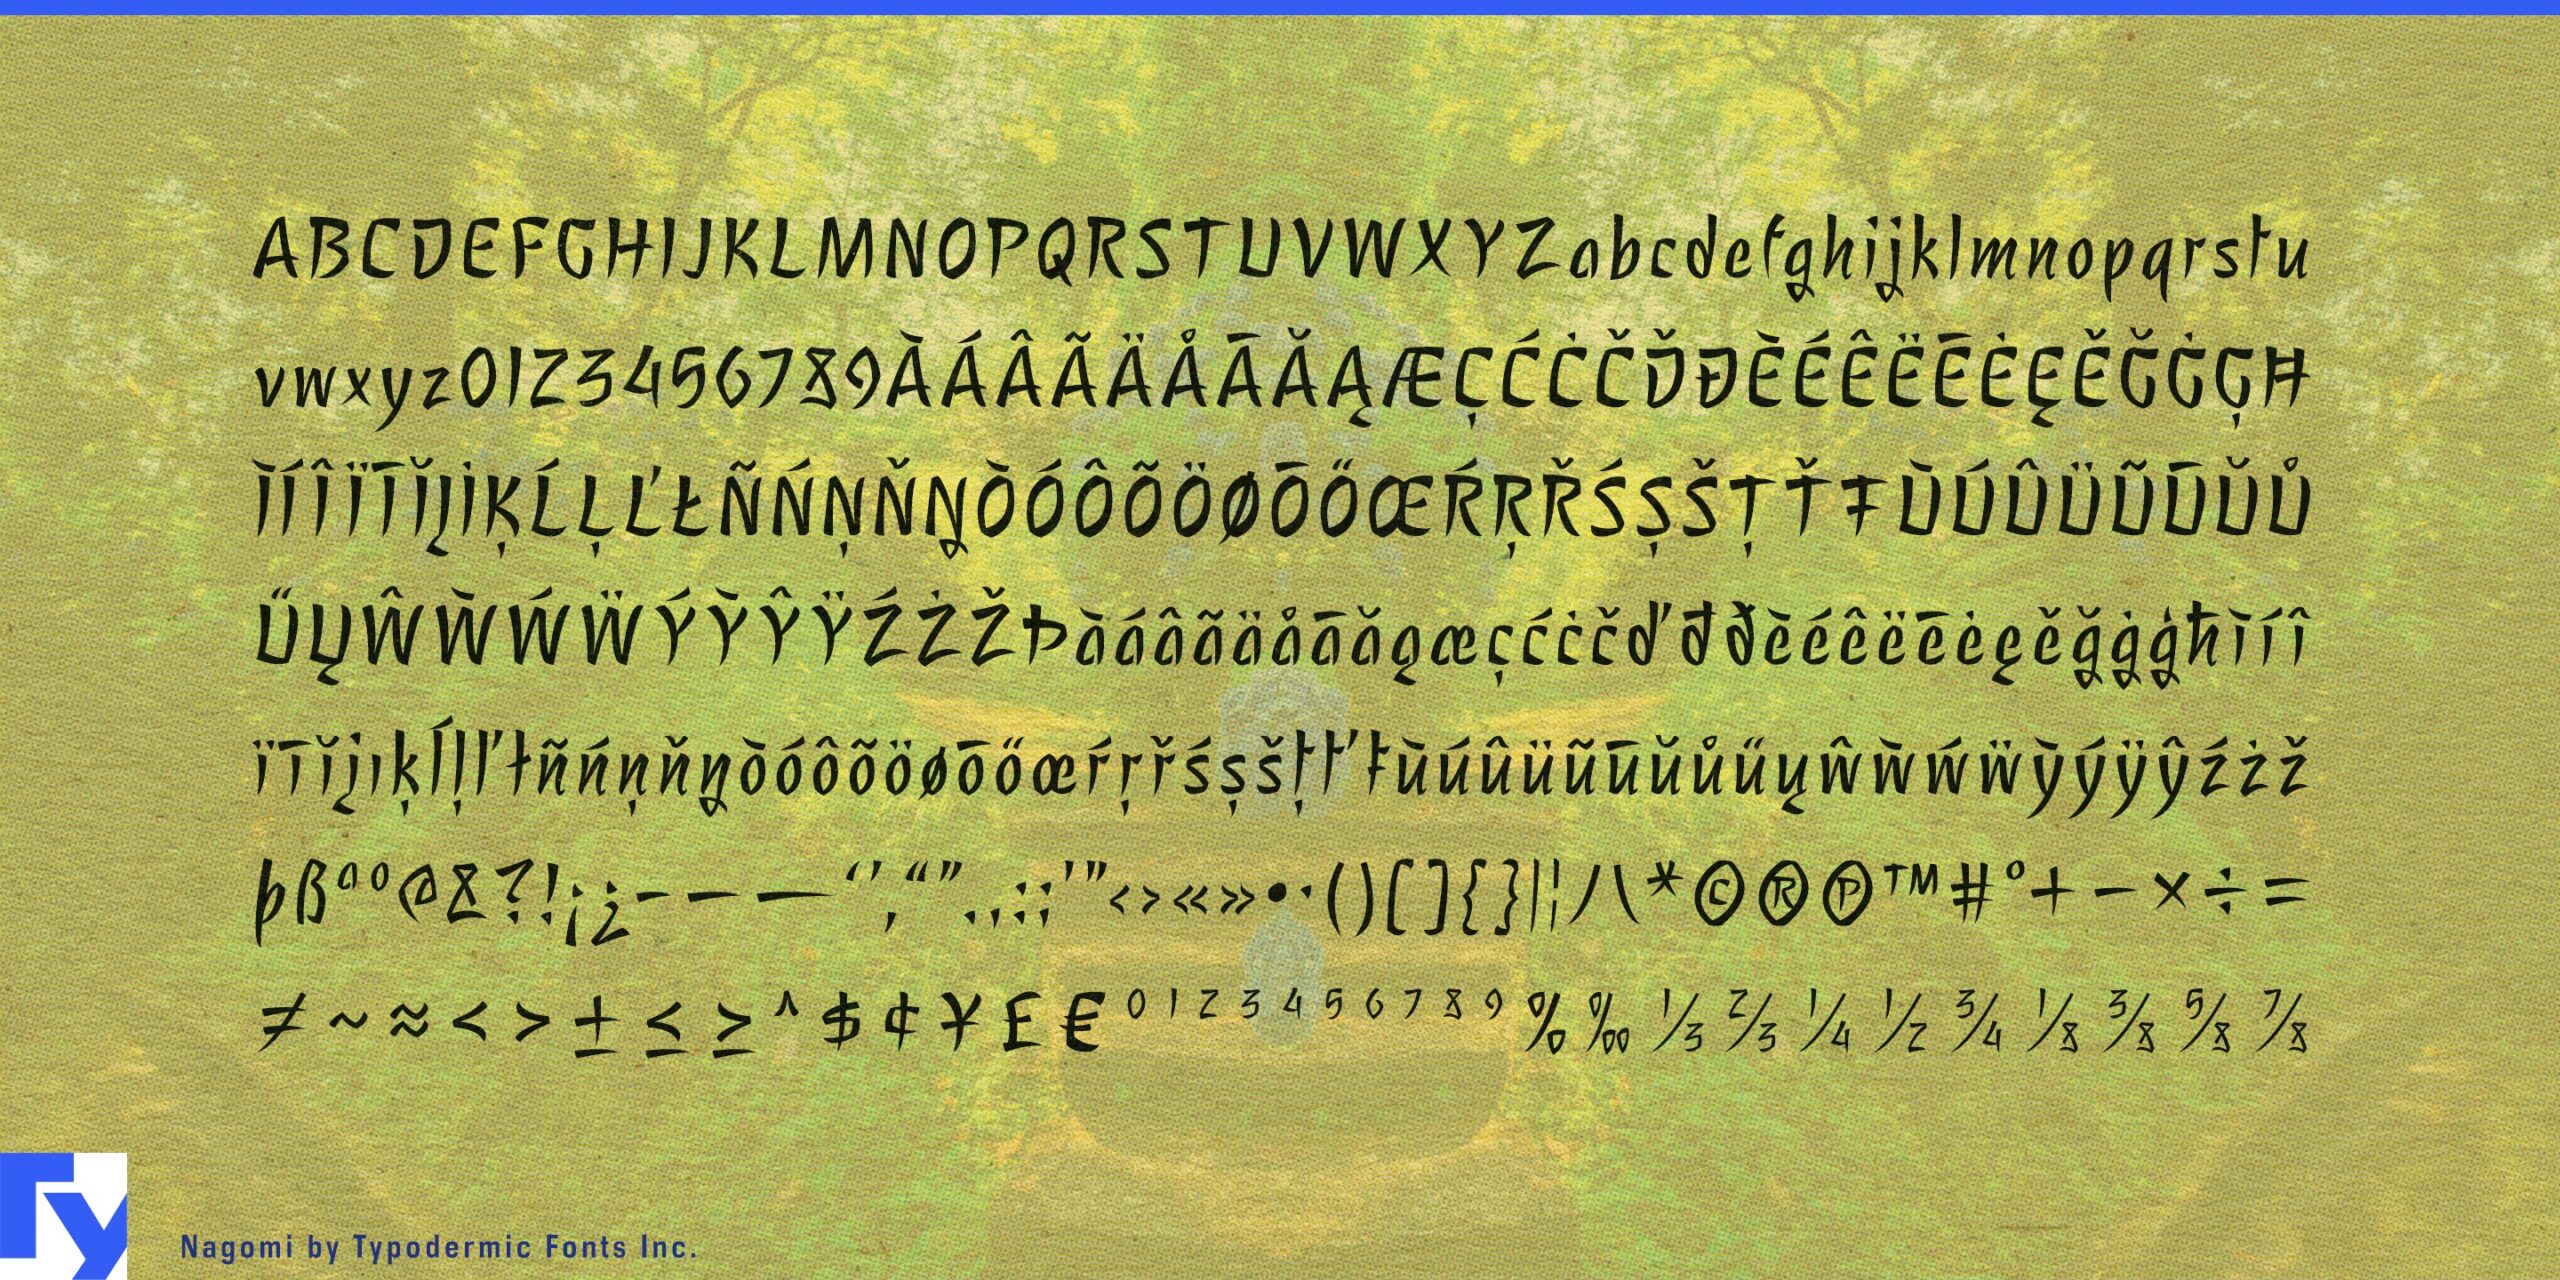 Serenity Unleashed: Nagomi Typeface Brings Tranquility to Designs